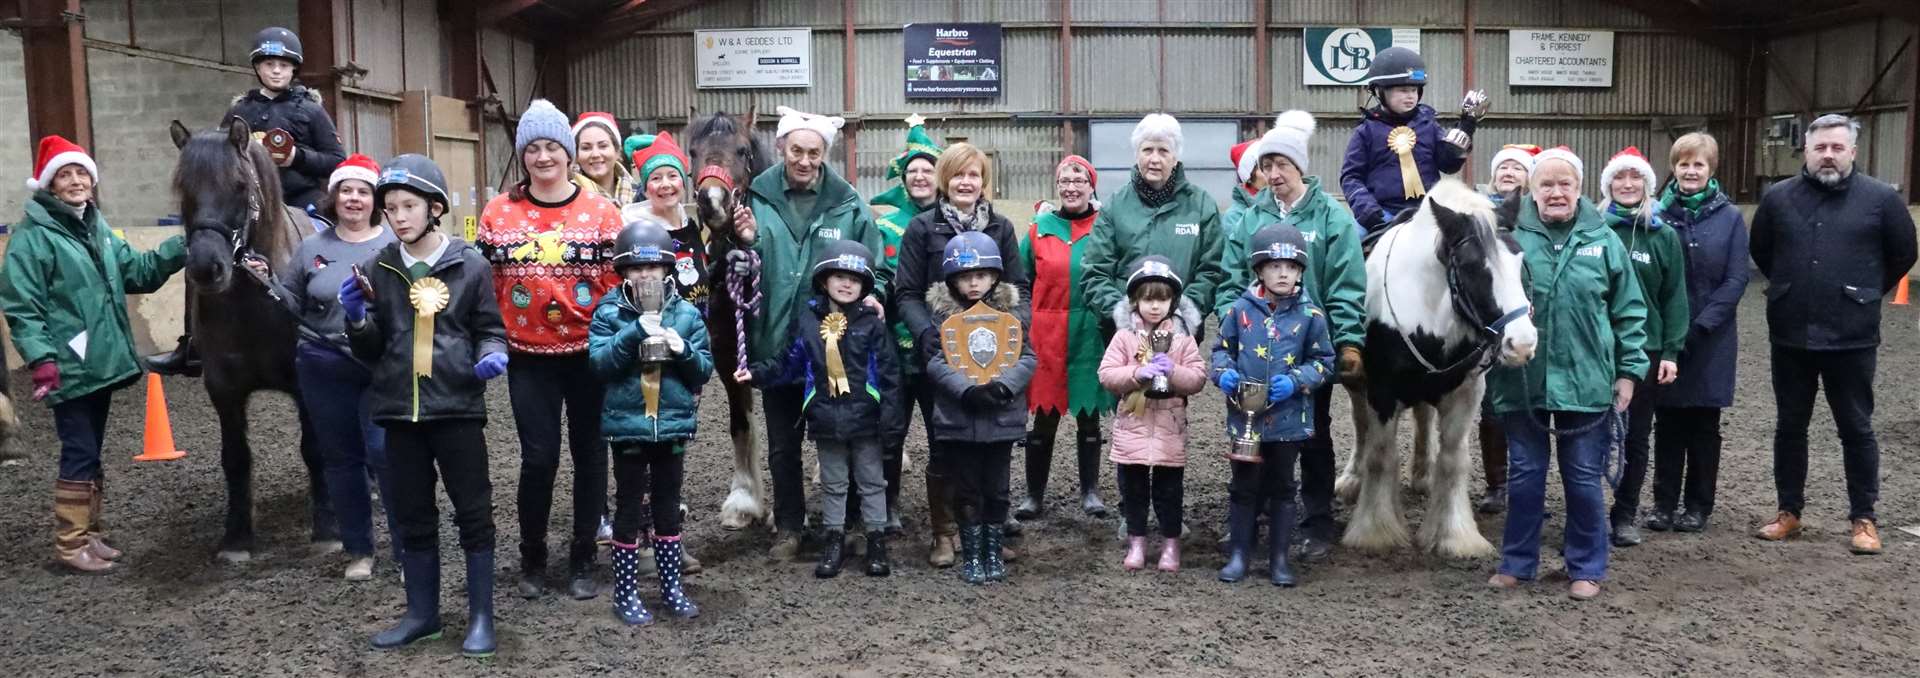 Members of Ride 1 with coach Erin Russell and helpers. The trophies and rosettes in this ride were presented by Christa Macdonald, Melanie Swanson and Willie Durrand from Lodge St Peter. Picture: Neil Buchan